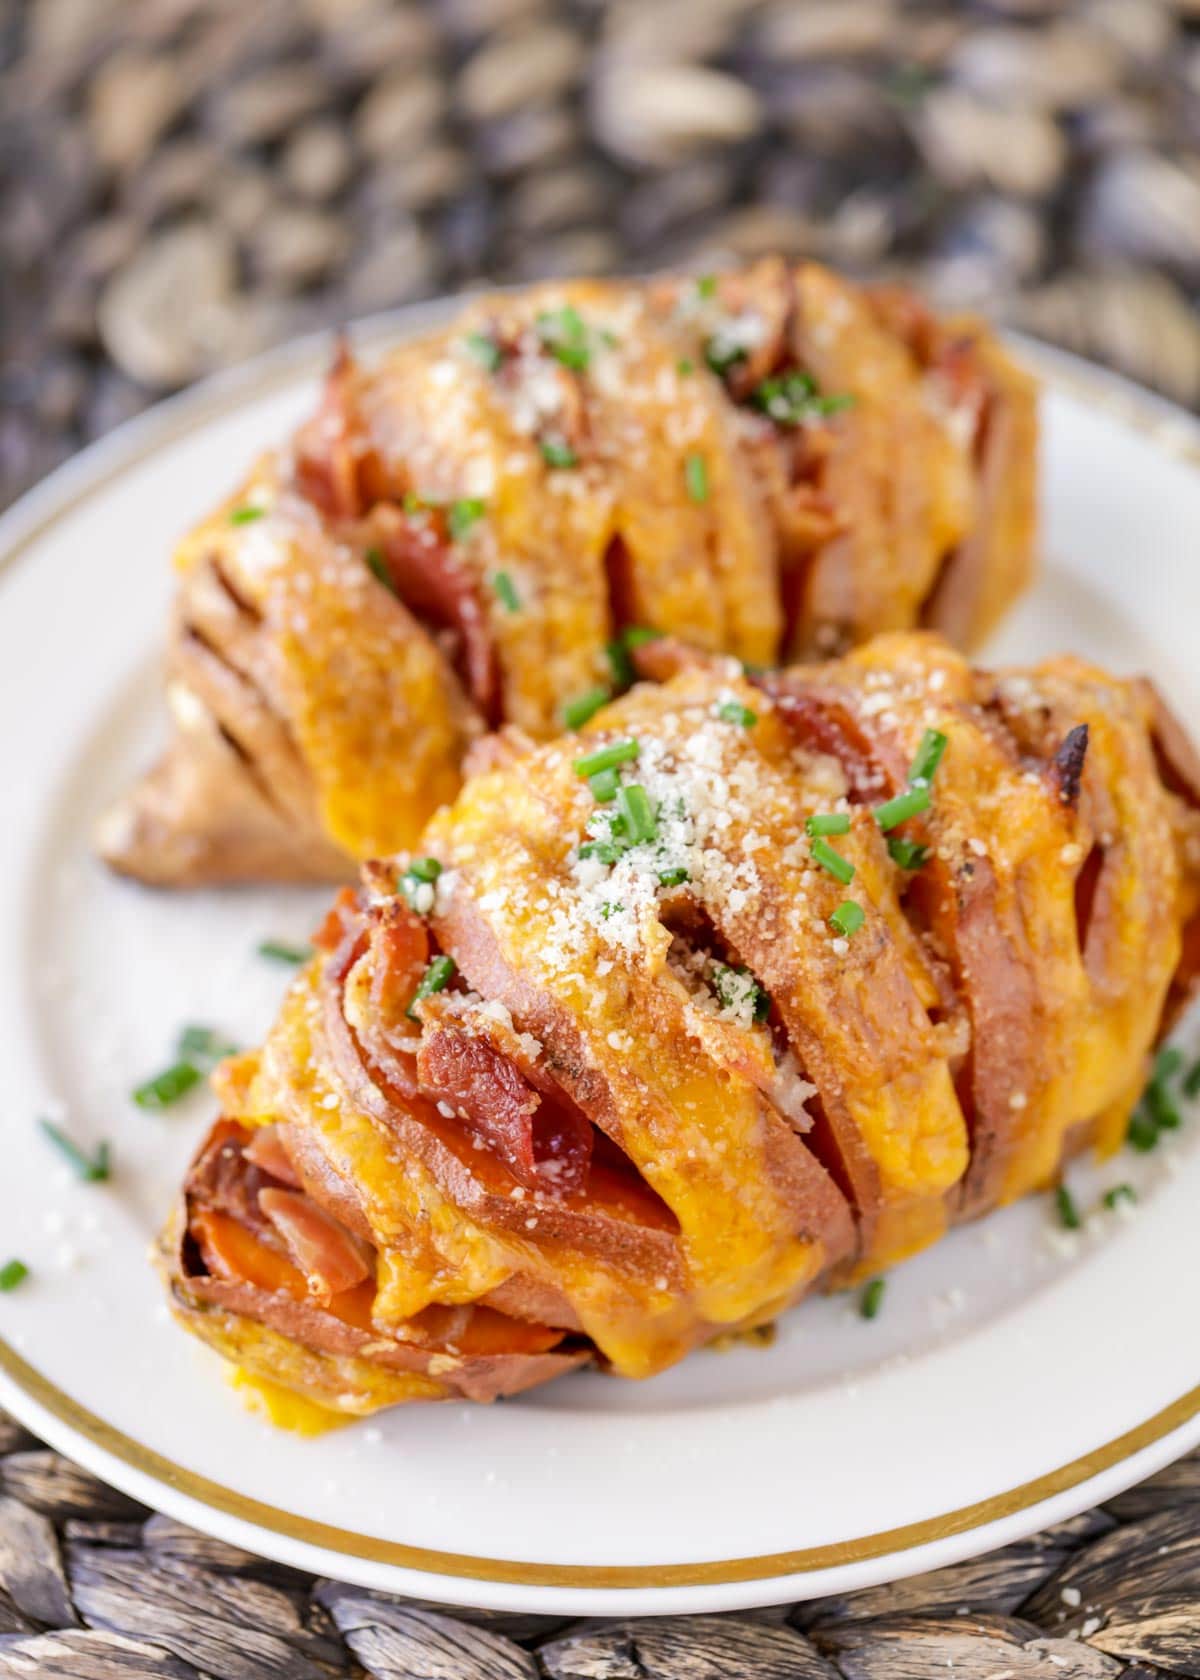 Chive sprinkled cheesy hasselback sweet potatoes served on a white plate